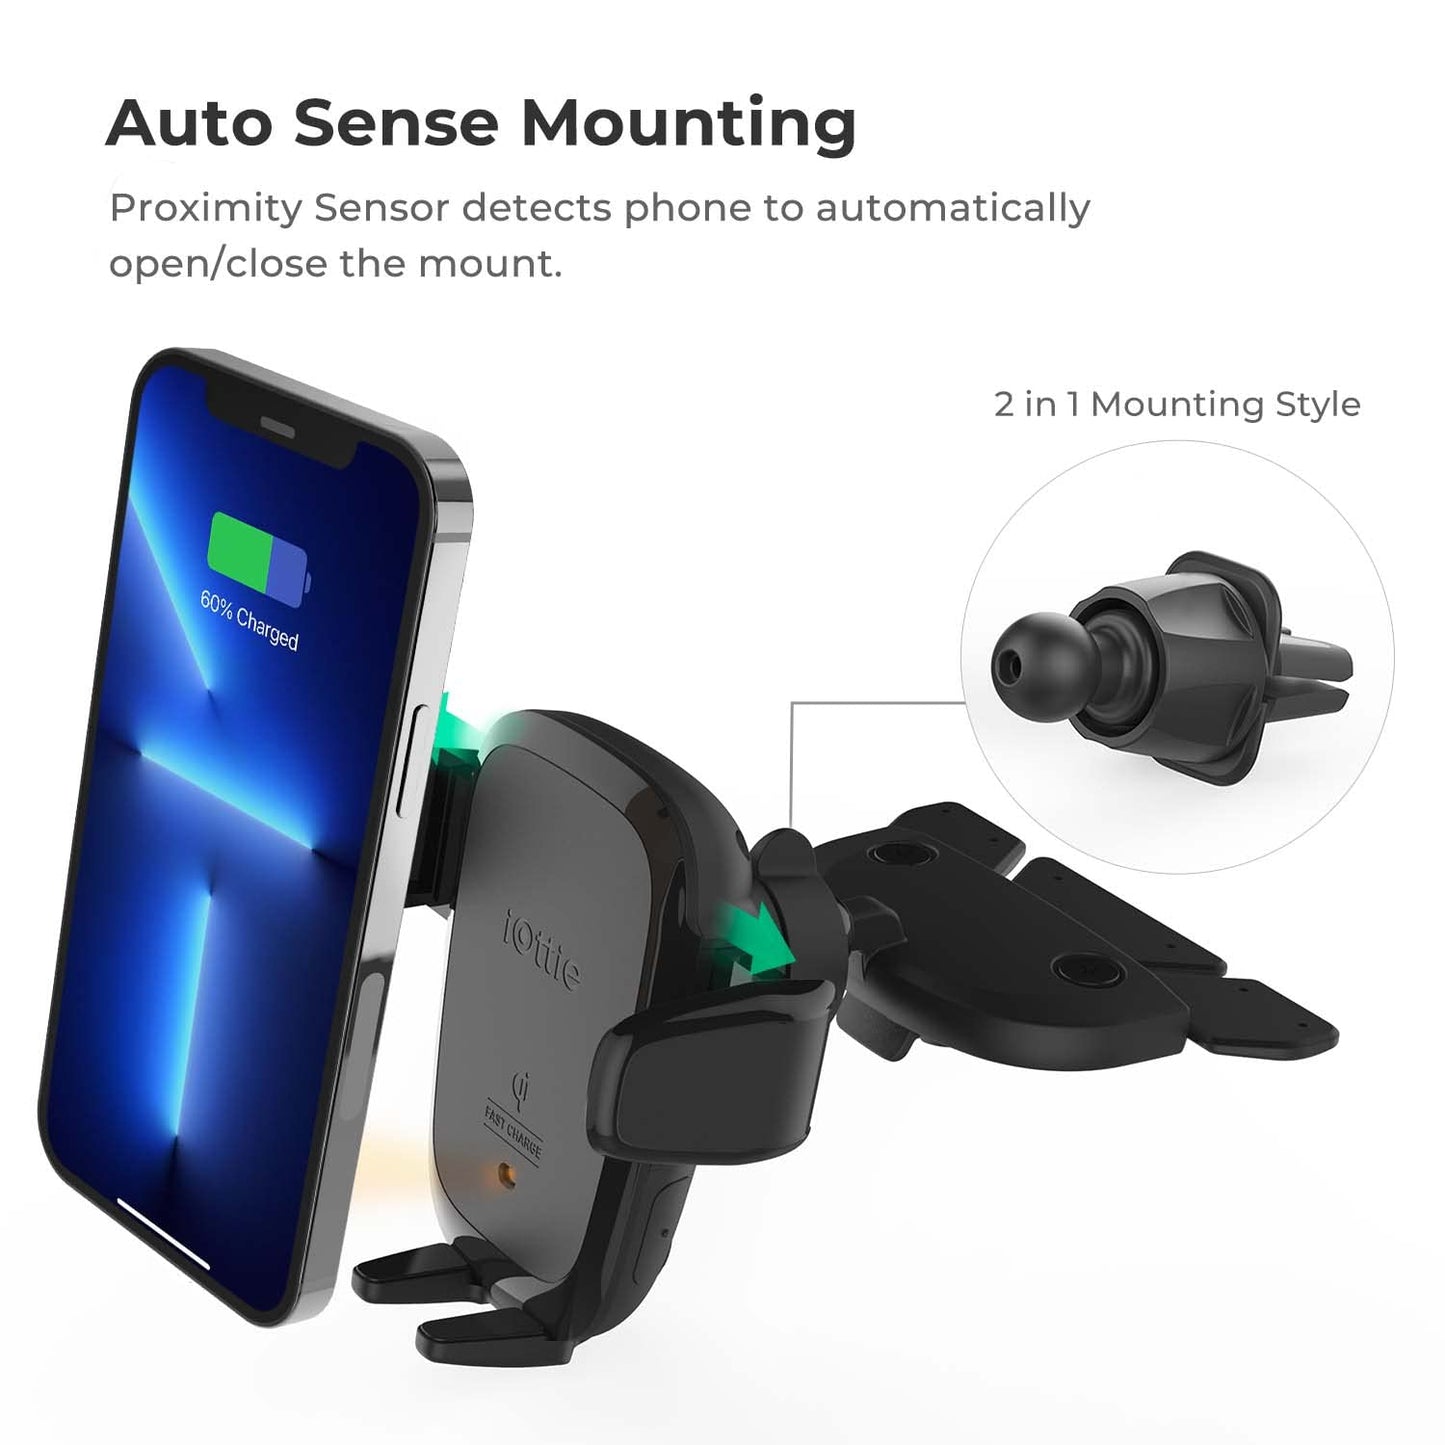 Iottie Wireless Car Charger Auto Sense Qi Charging Automatic Clamping Cd + Air Vent Combo Phone Mount For Iphone, Samsung Galaxy, Huawei, Lg, Smartphones